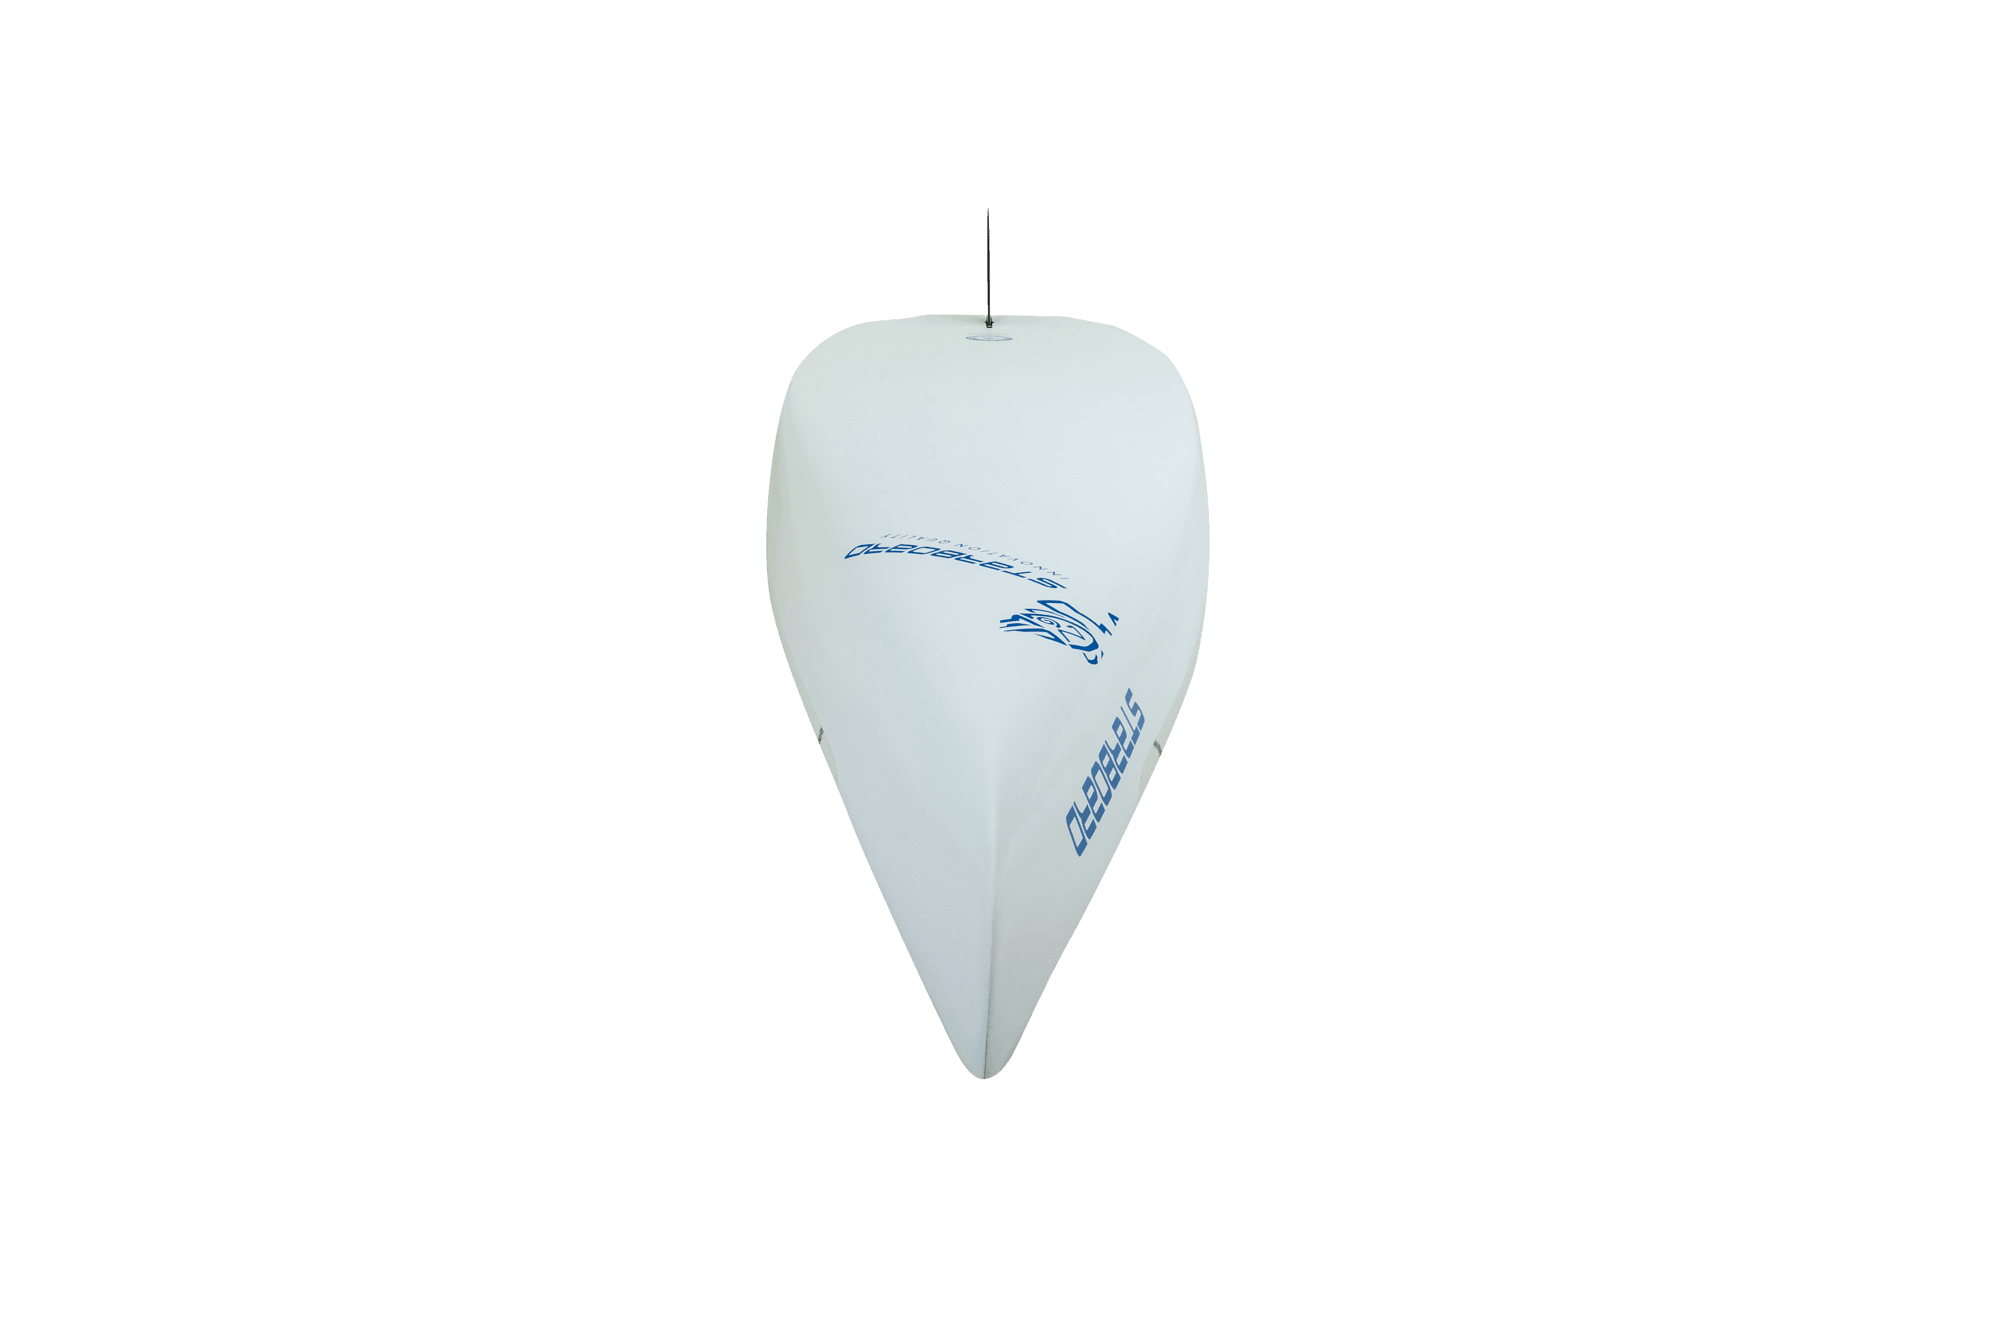 STARBOARD - Waterline Lite Tech 2023 - 14' - {{ SUP Montreal }}